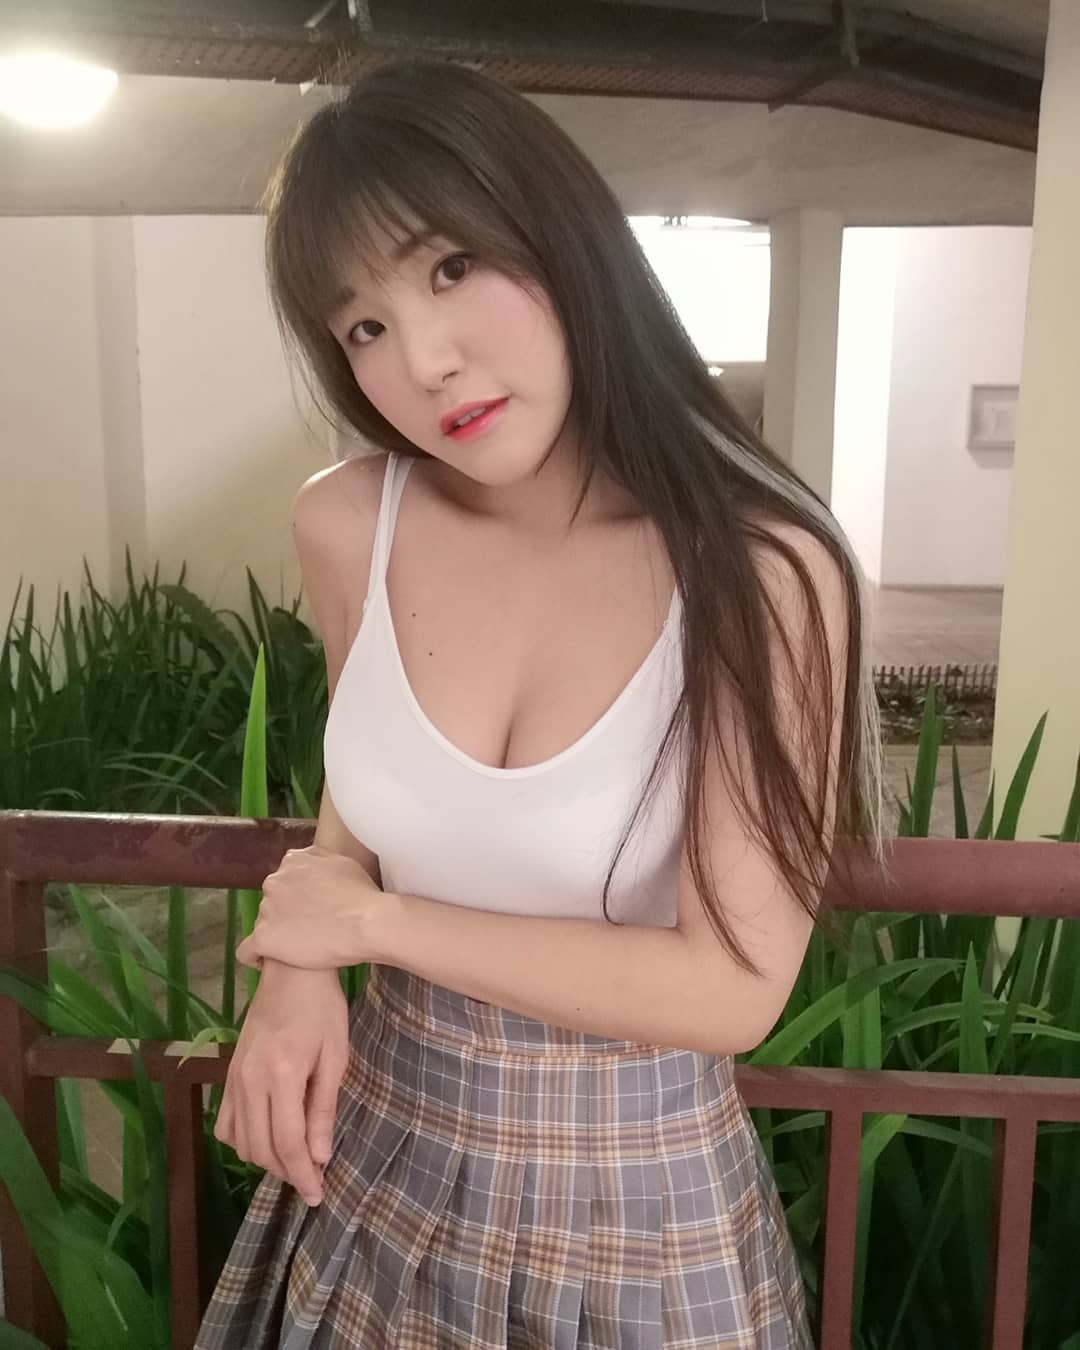 Siew Pui Yi pay a New Year call with huge boobs